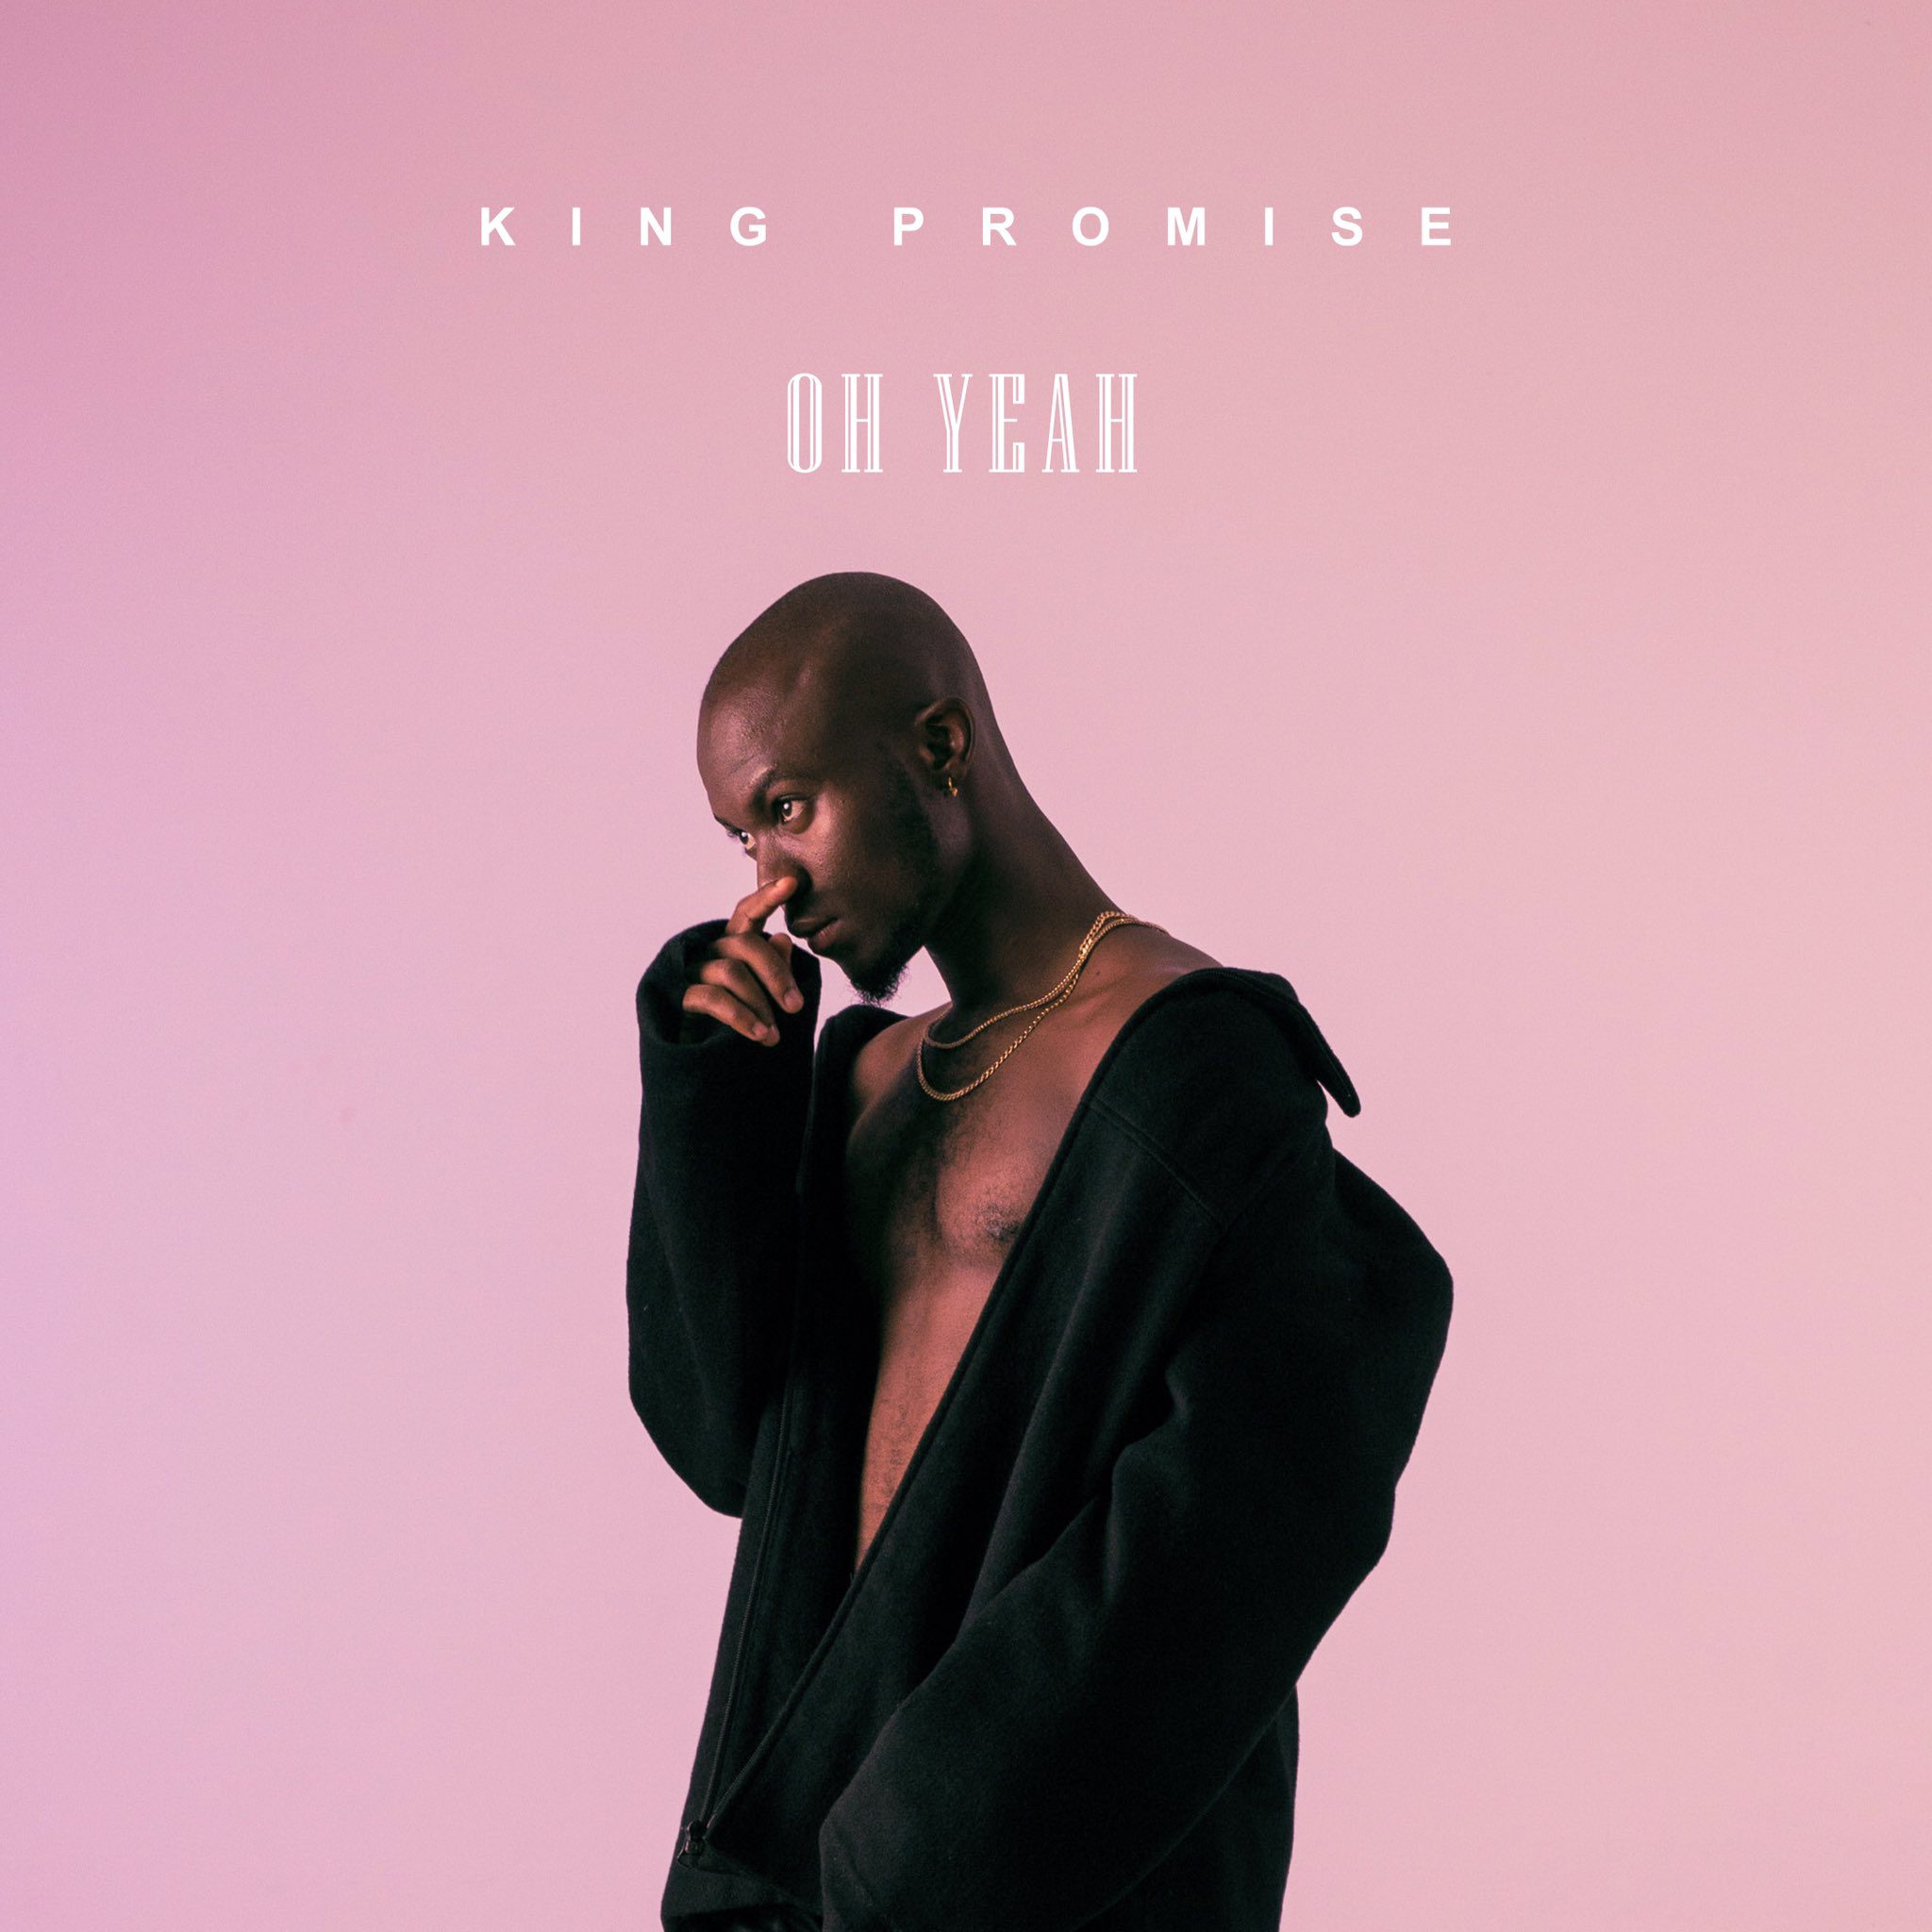 Audio/Video: King Promise – Oh Yeah (Produced by Killbeatz)